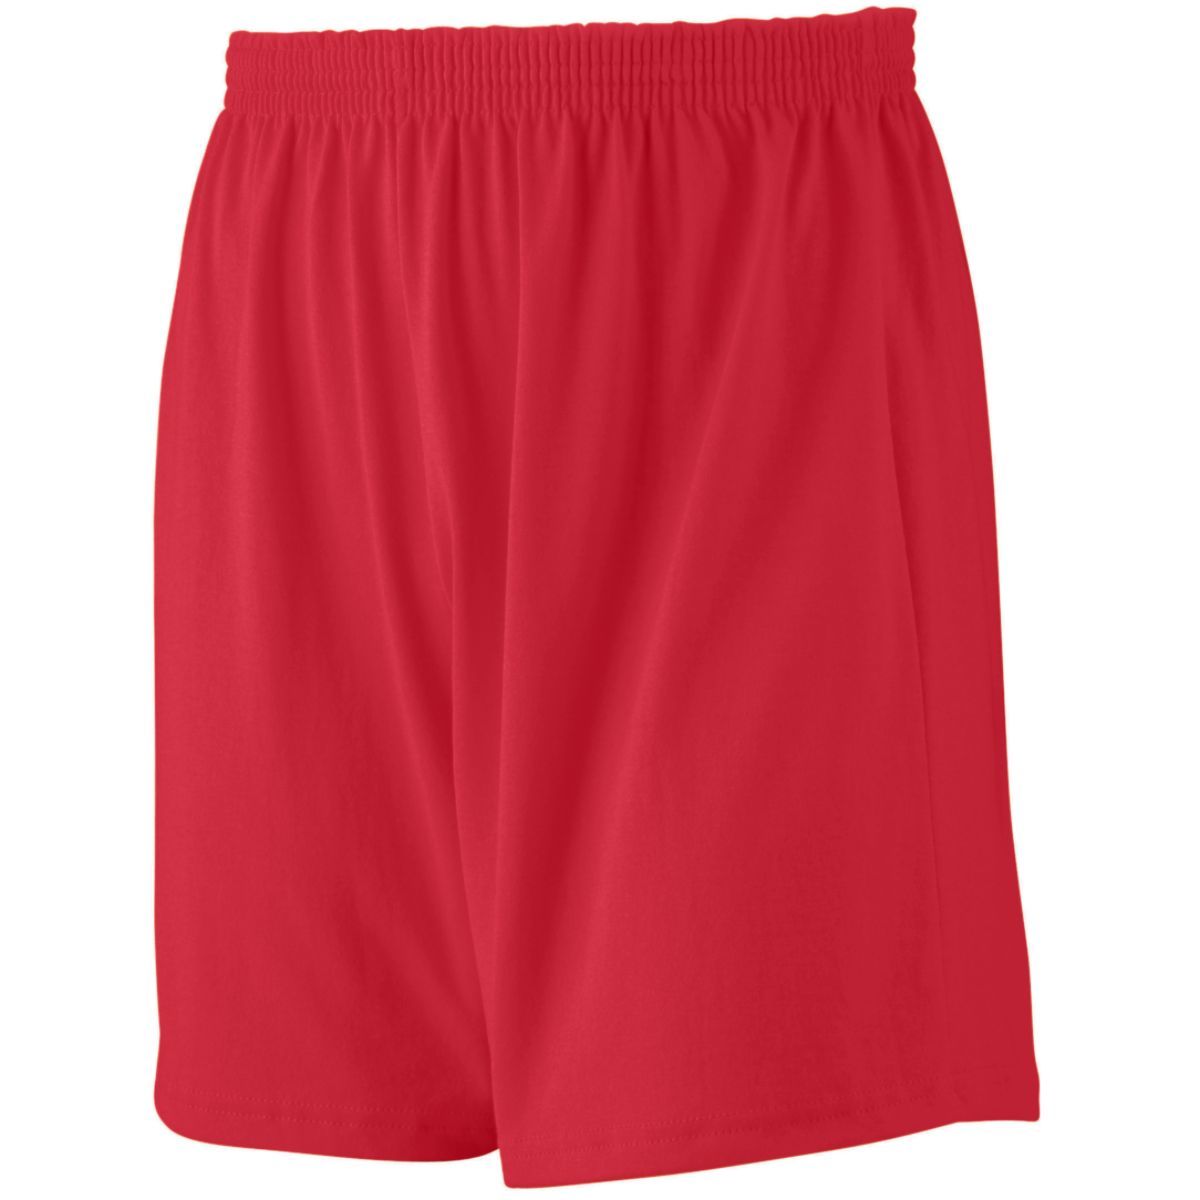 Augusta Sportswear Youth Jersey Knit Shorts in Red  -Part of the Youth, Youth-Shorts, Augusta-Products product lines at KanaleyCreations.com